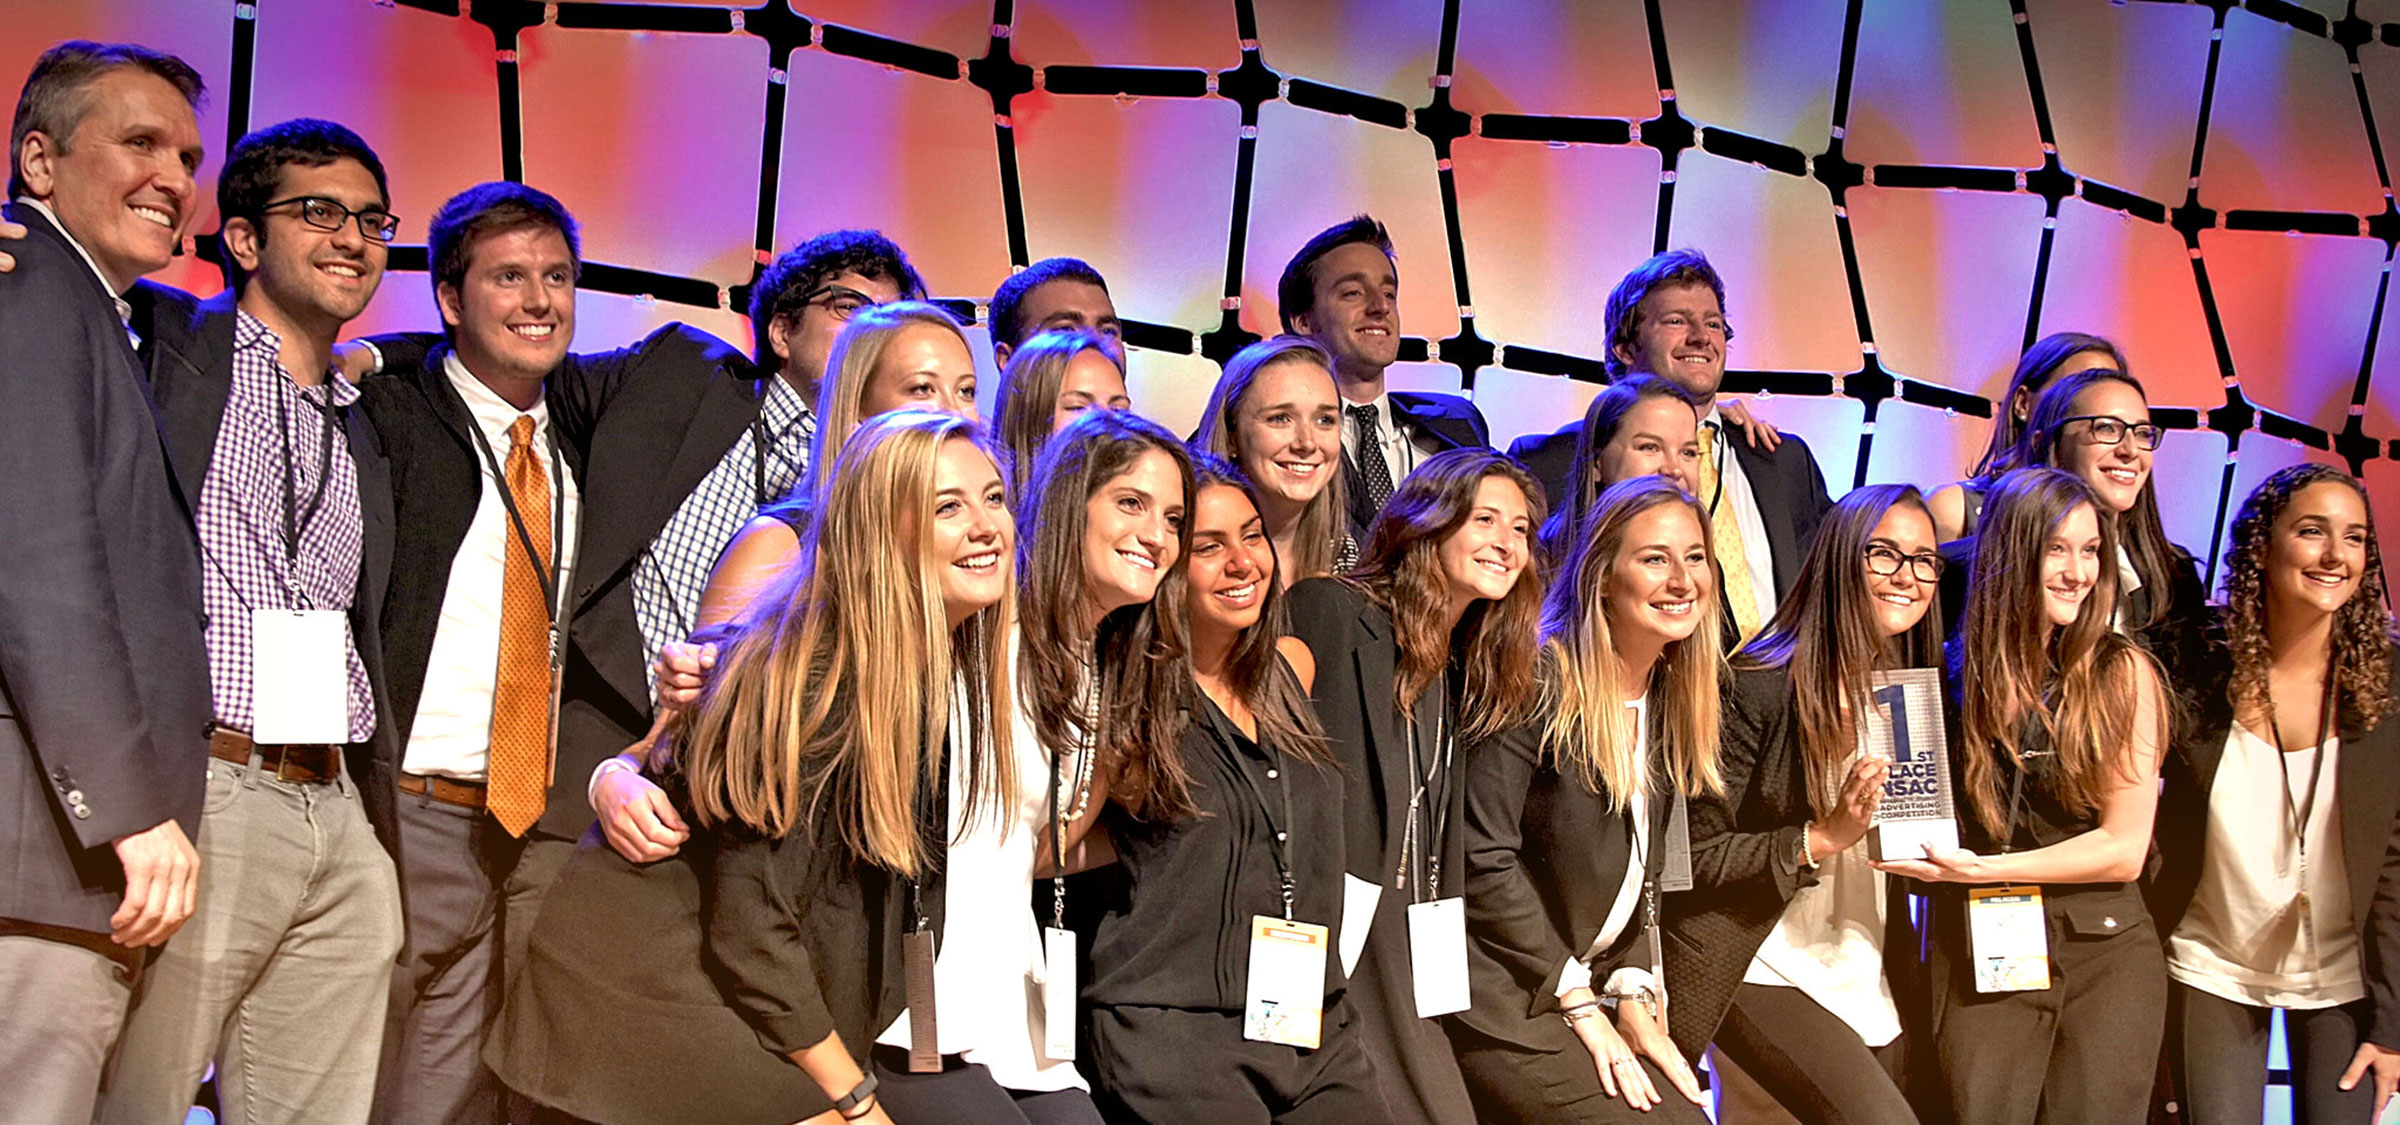 Professor Carrie Heilman, right, with her students posing with their trophy after winning the American Advertising Federation’s 2016 National Student Advertising Competition.